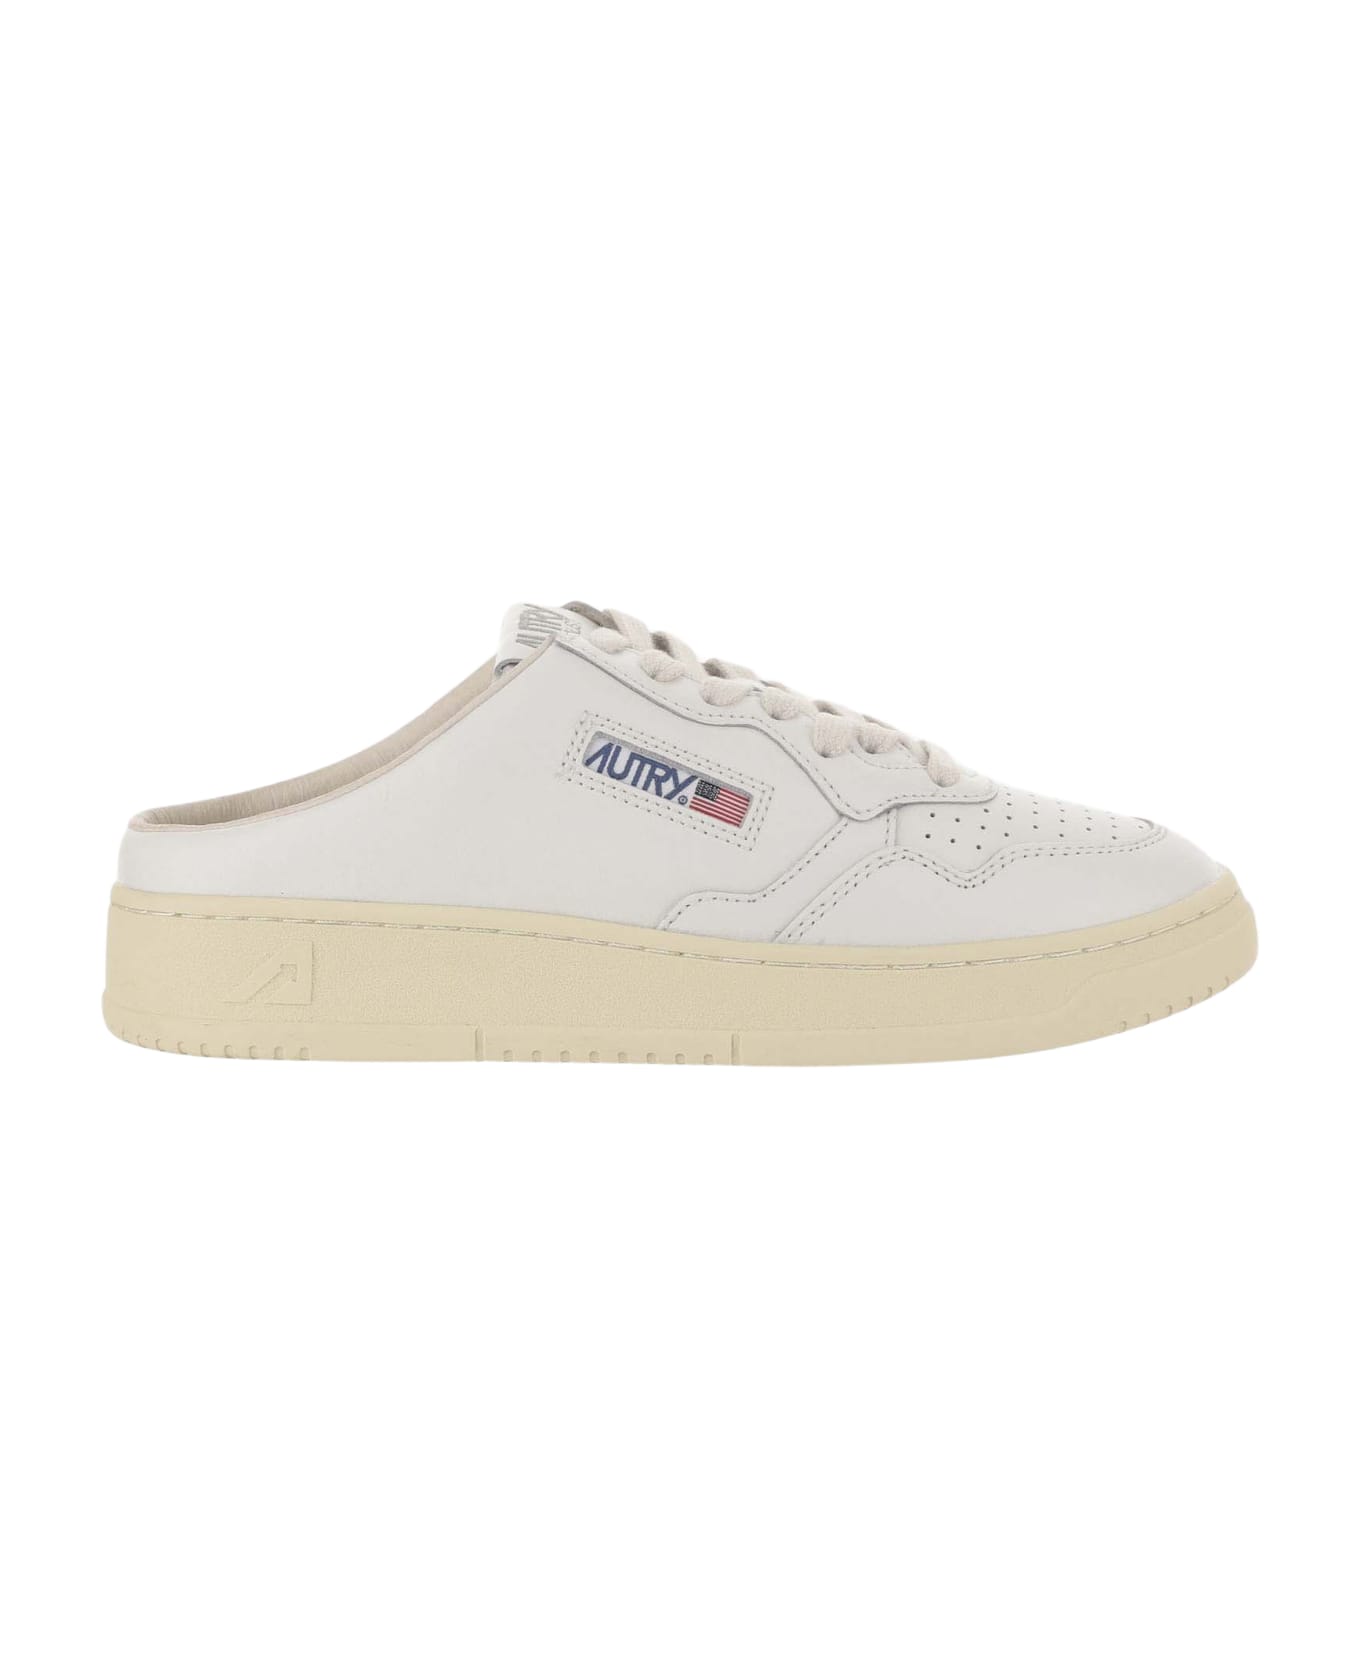 Autry Medalist Mule Low Leather Sneakers - White